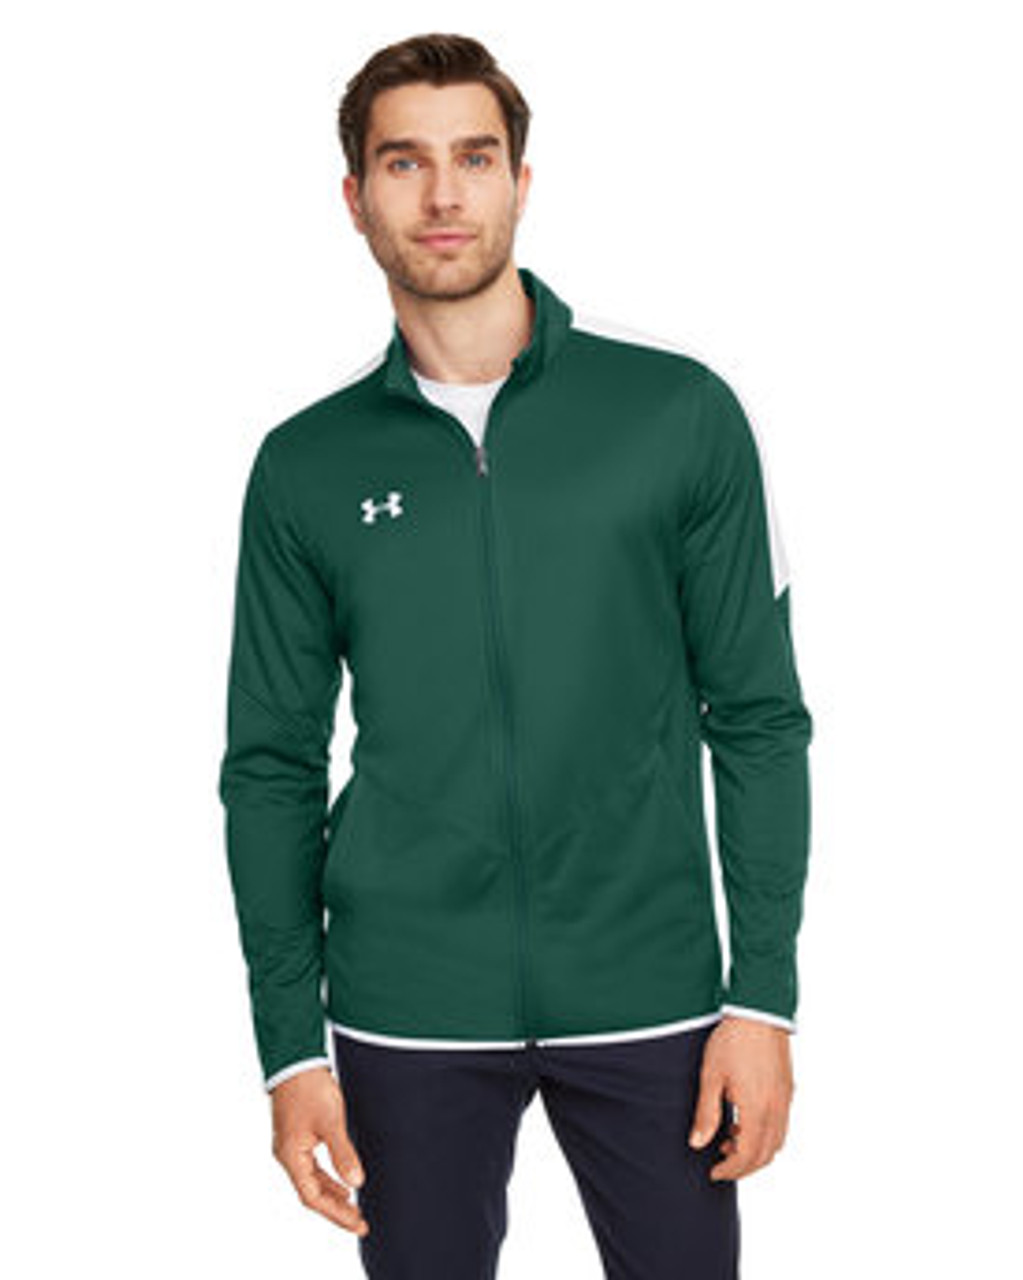 Under Armour Men's Rival Knit Jacket 1326761 FOREST GRN _301